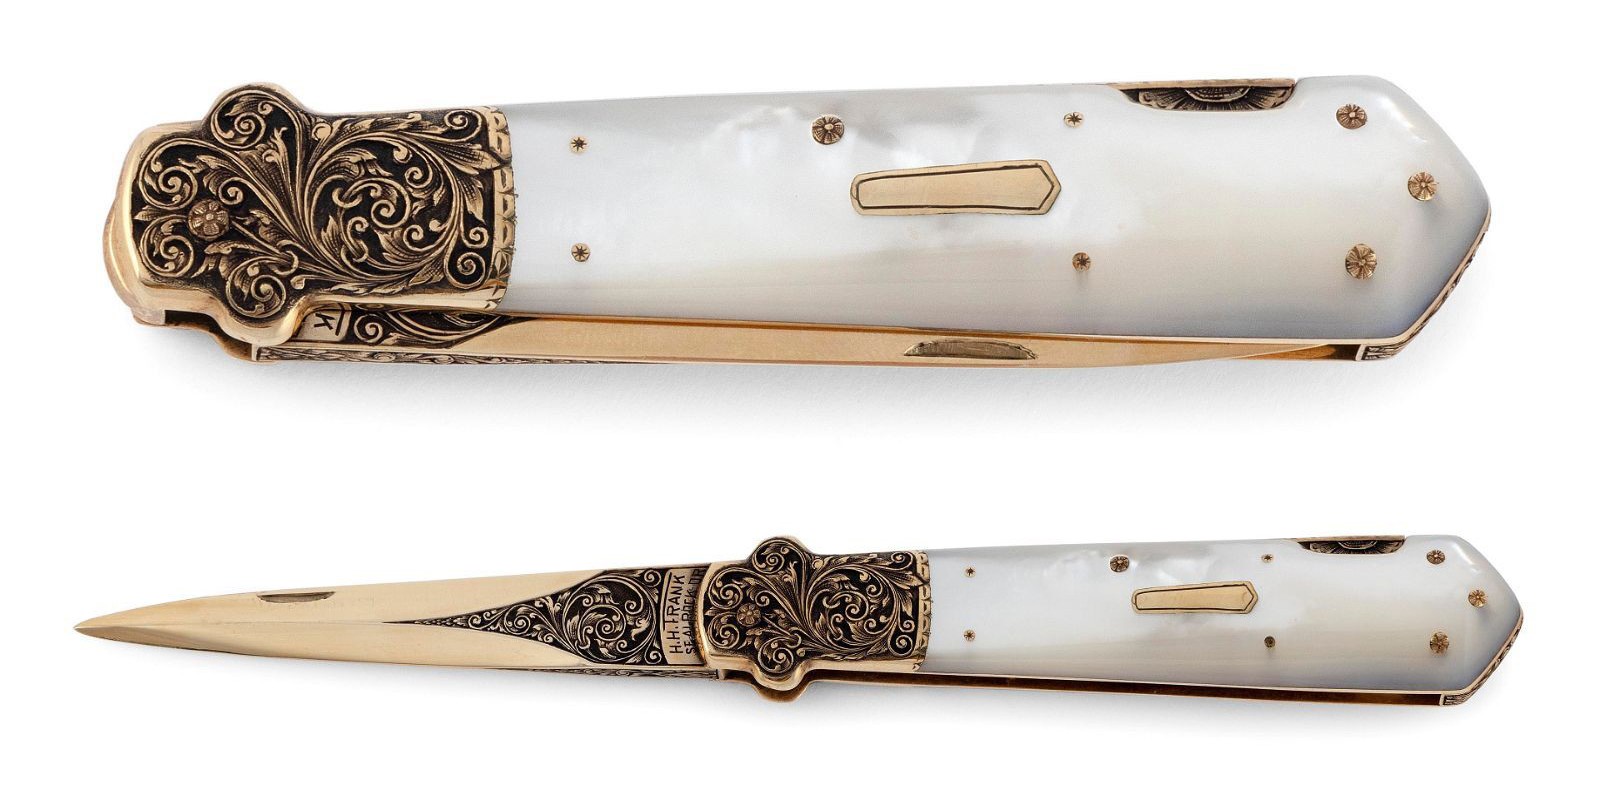 Gold and mother-of-pearl dagger folding knife by Heinrich ’Henry’ Frank, which sold for $11,000 ($13,860 with buyer’s premium) at Eldred’s.